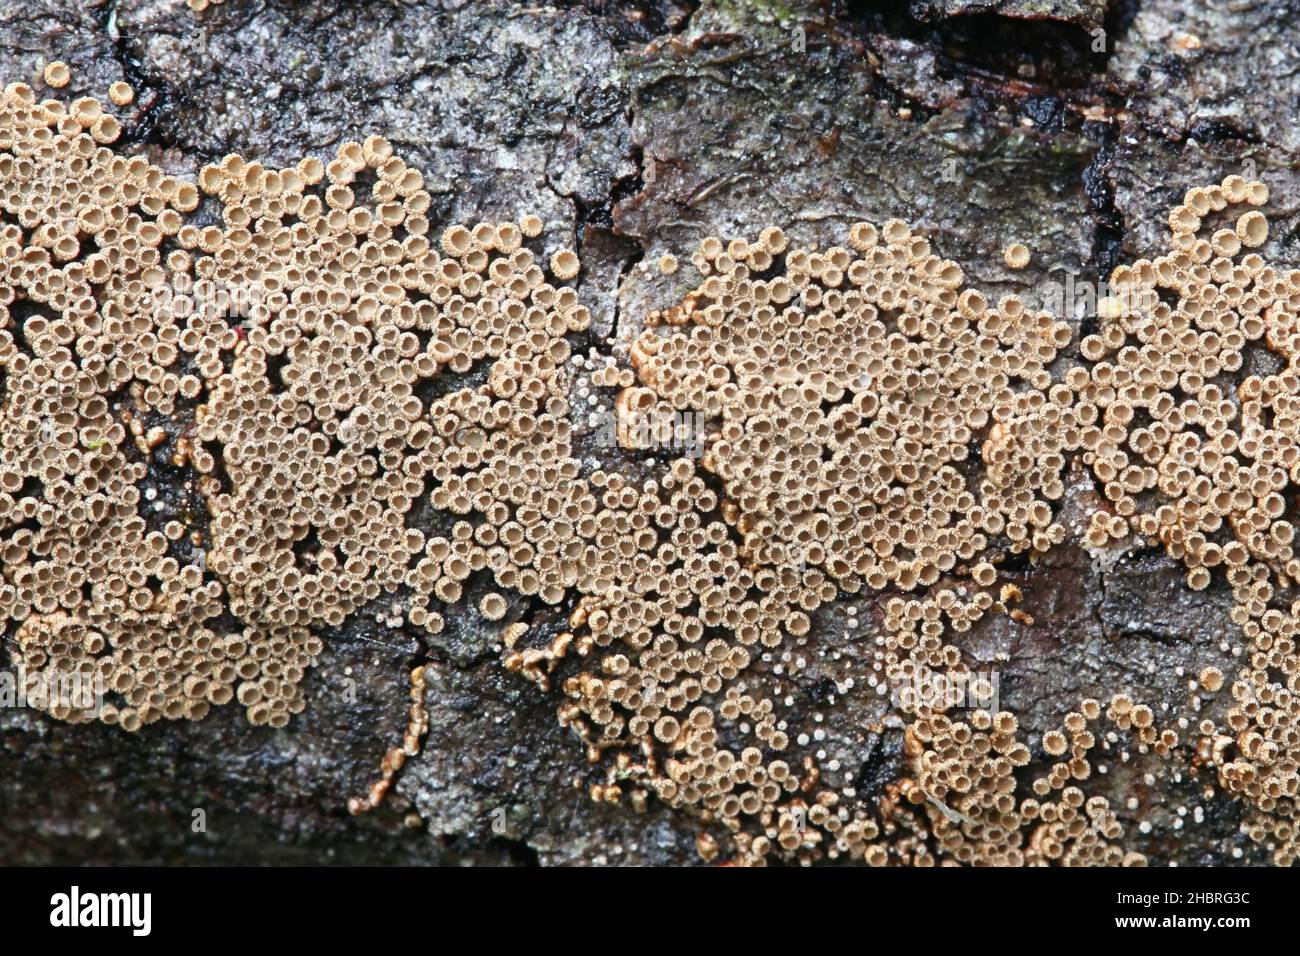 Merismodes anomala, a little cup-shaped cyphelloid fungus from Finland with no common english name Stock Photo